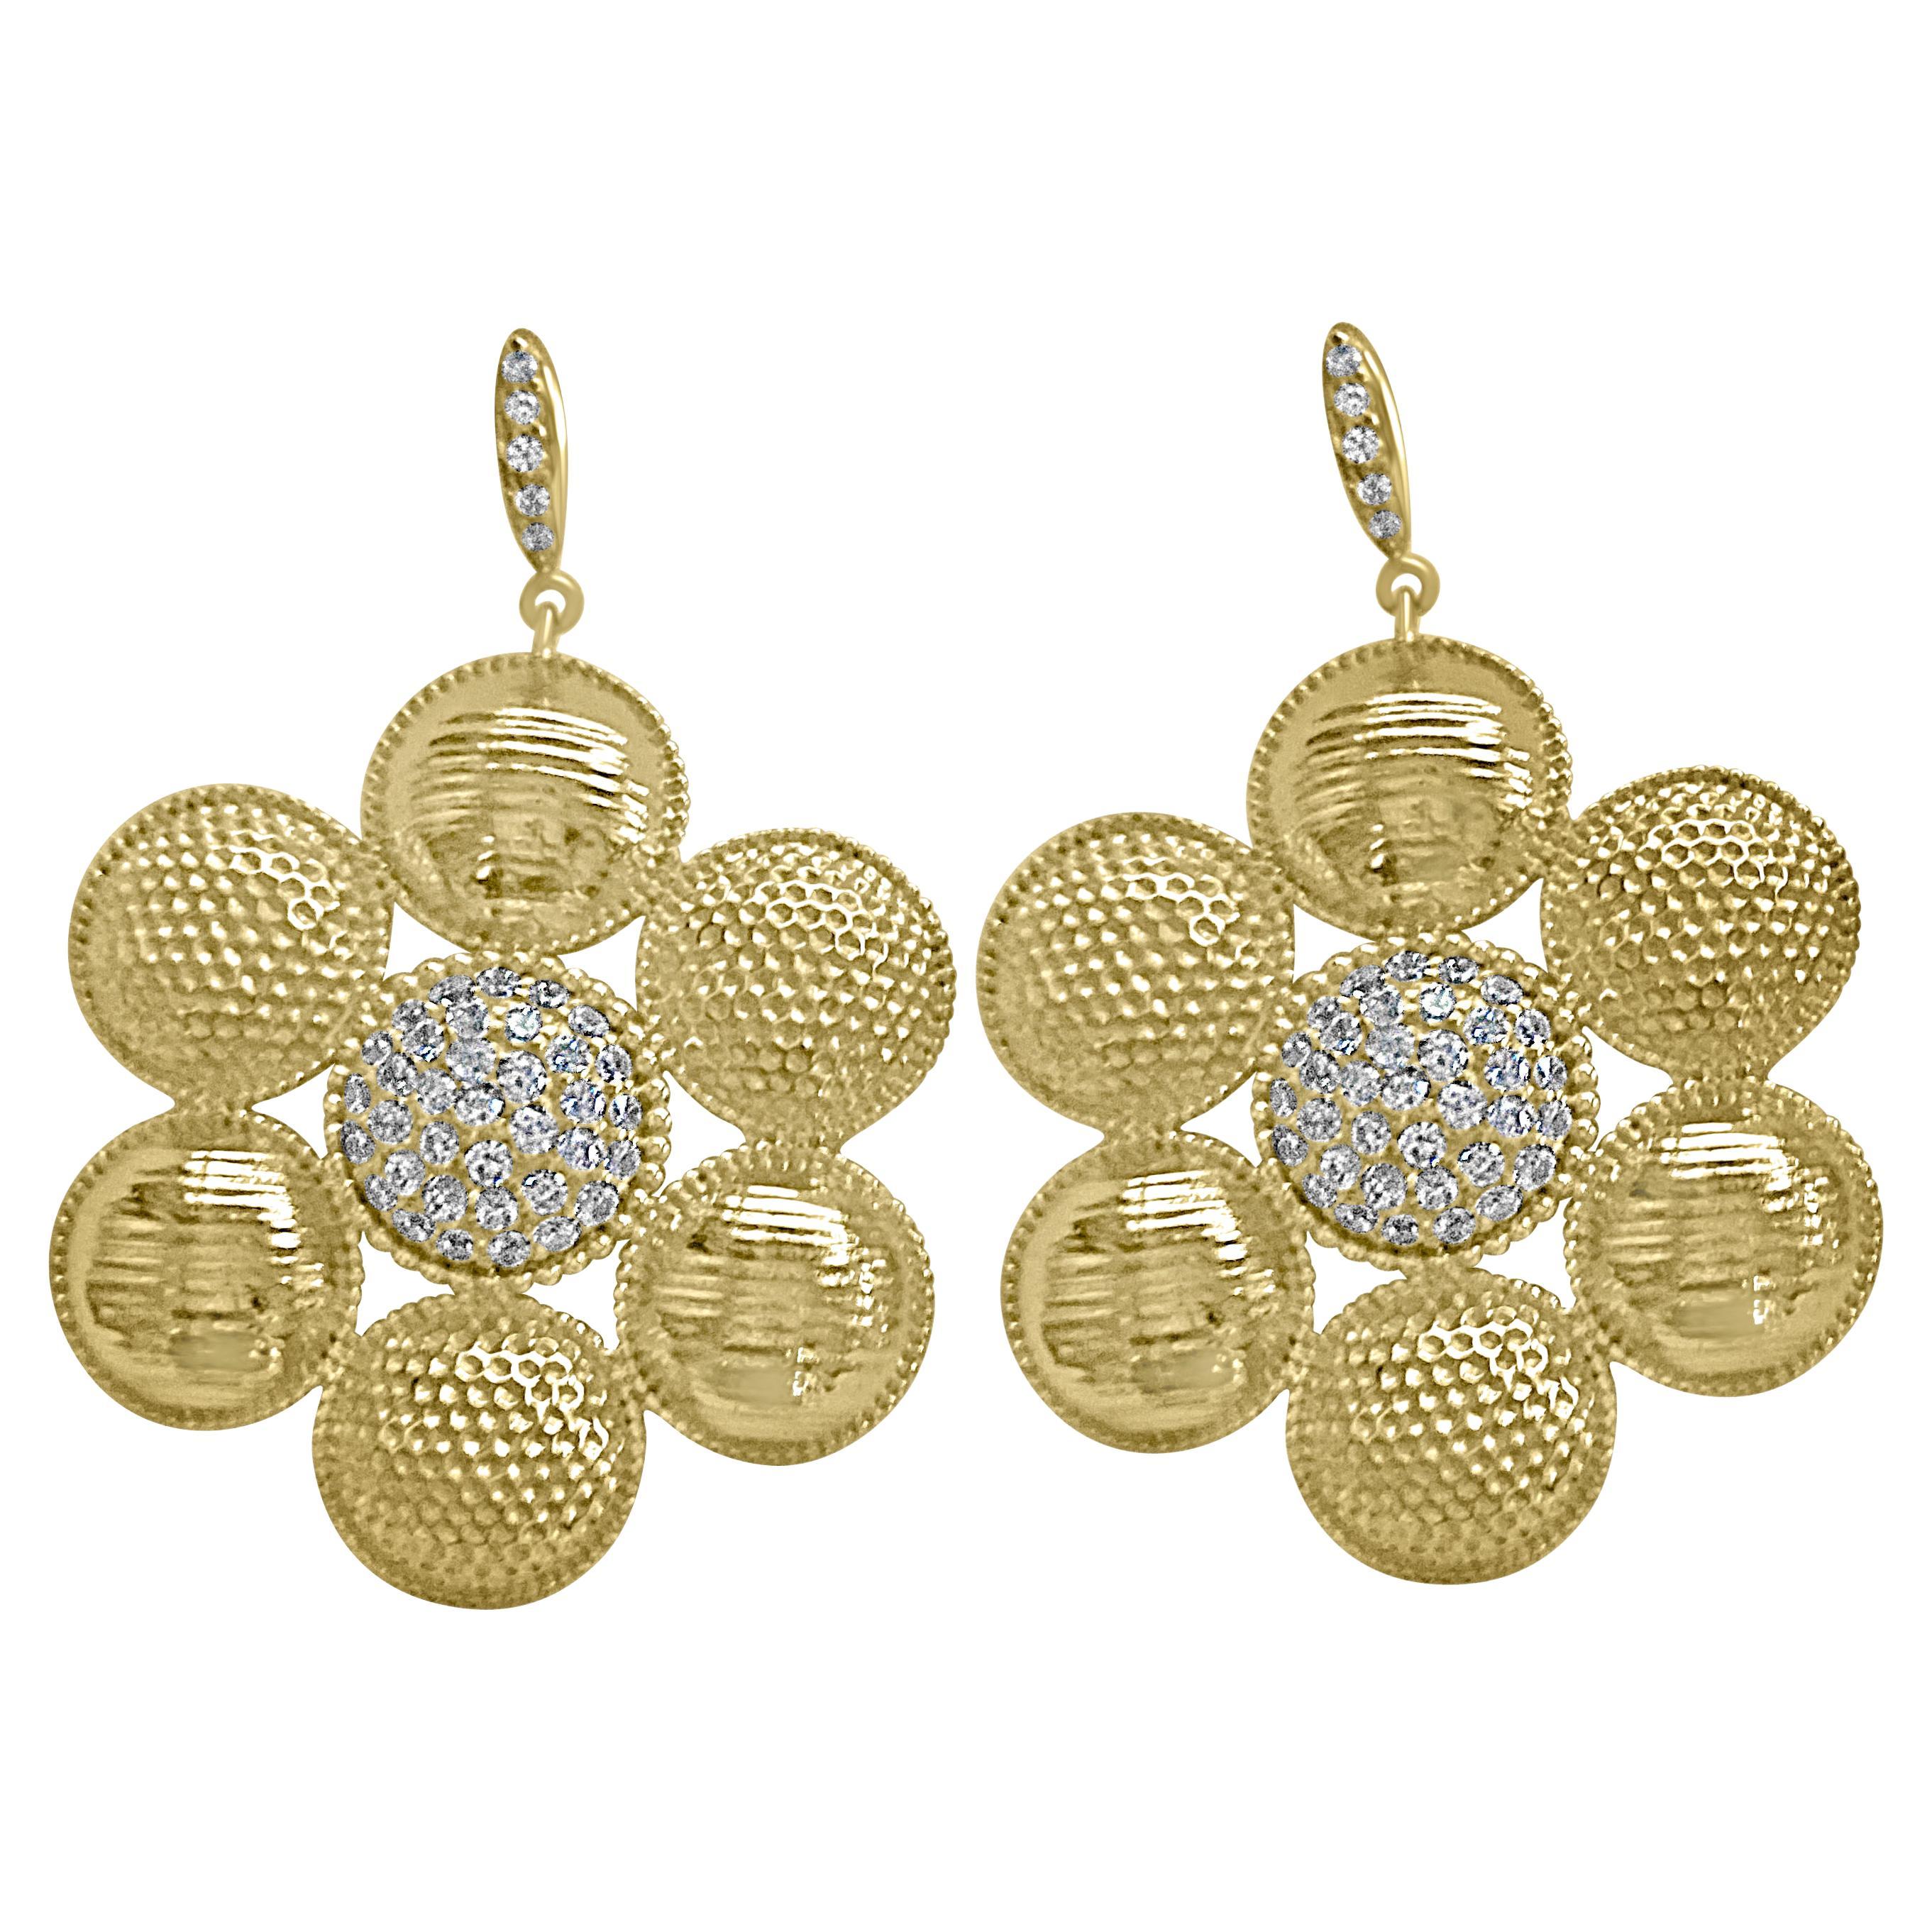 Twin Elegance Enchantment Circle Cluster Statement Earrings